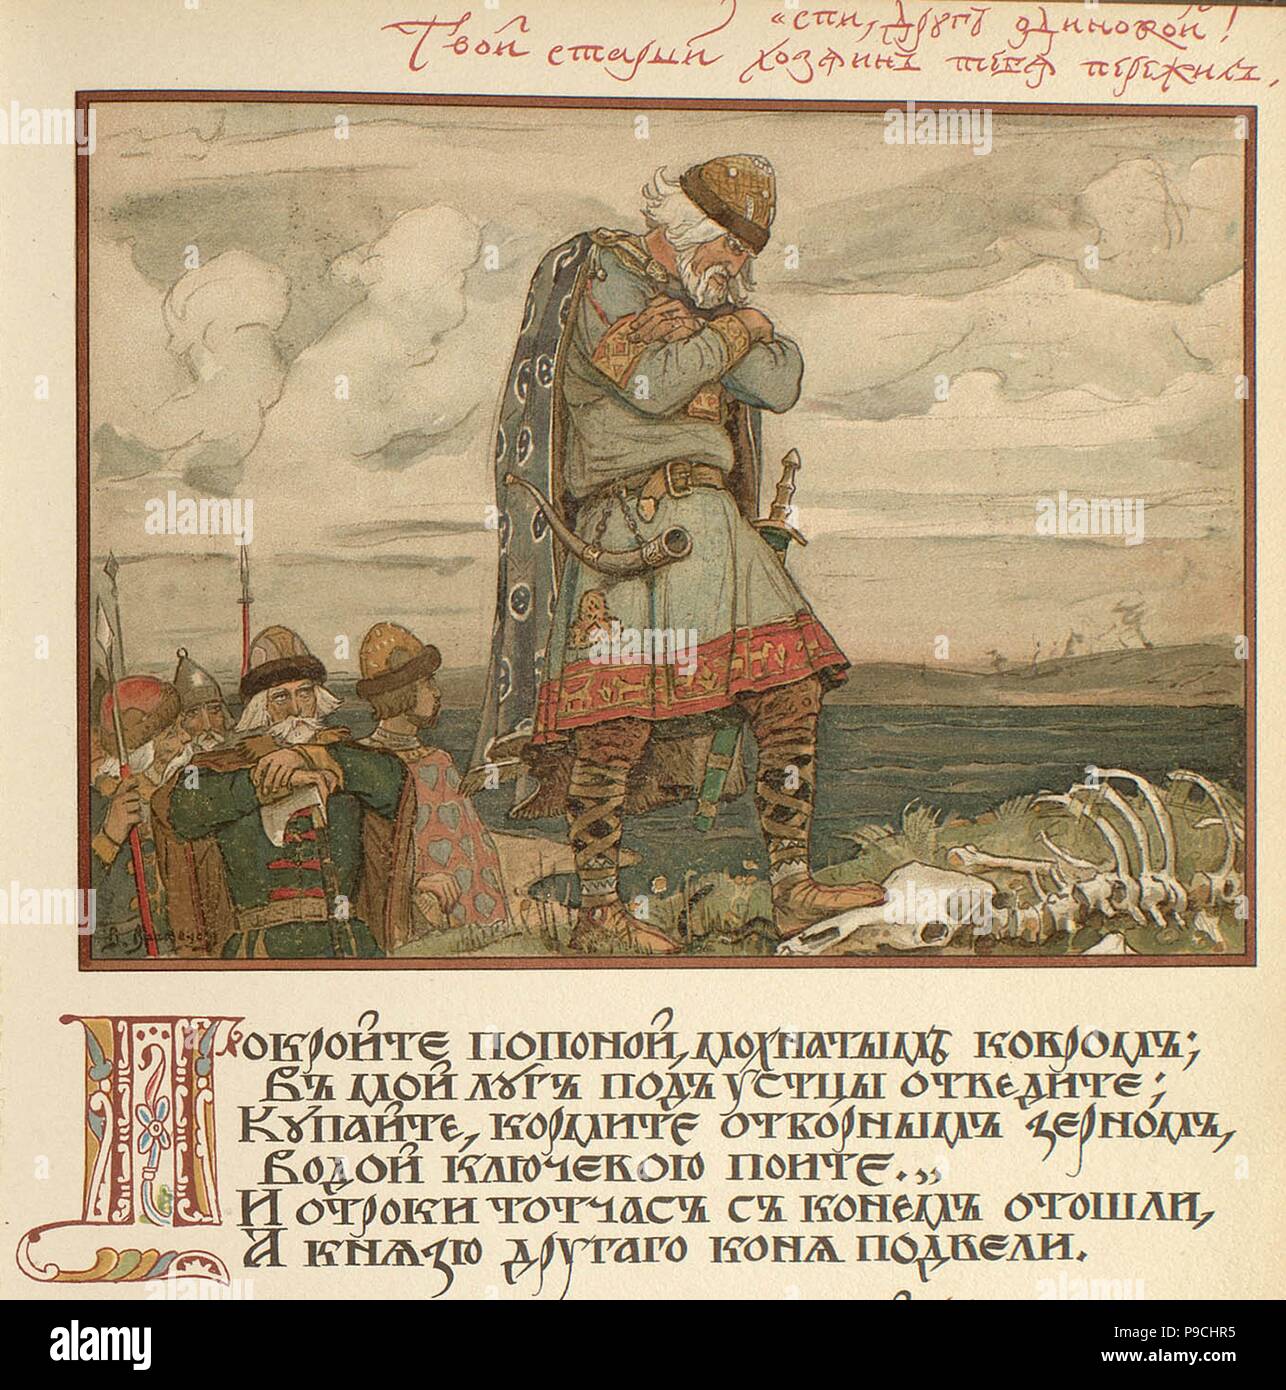 Illustration for Canto of Oleg the Wise. Museum: PRIVATE COLLECTION. Stock Photo